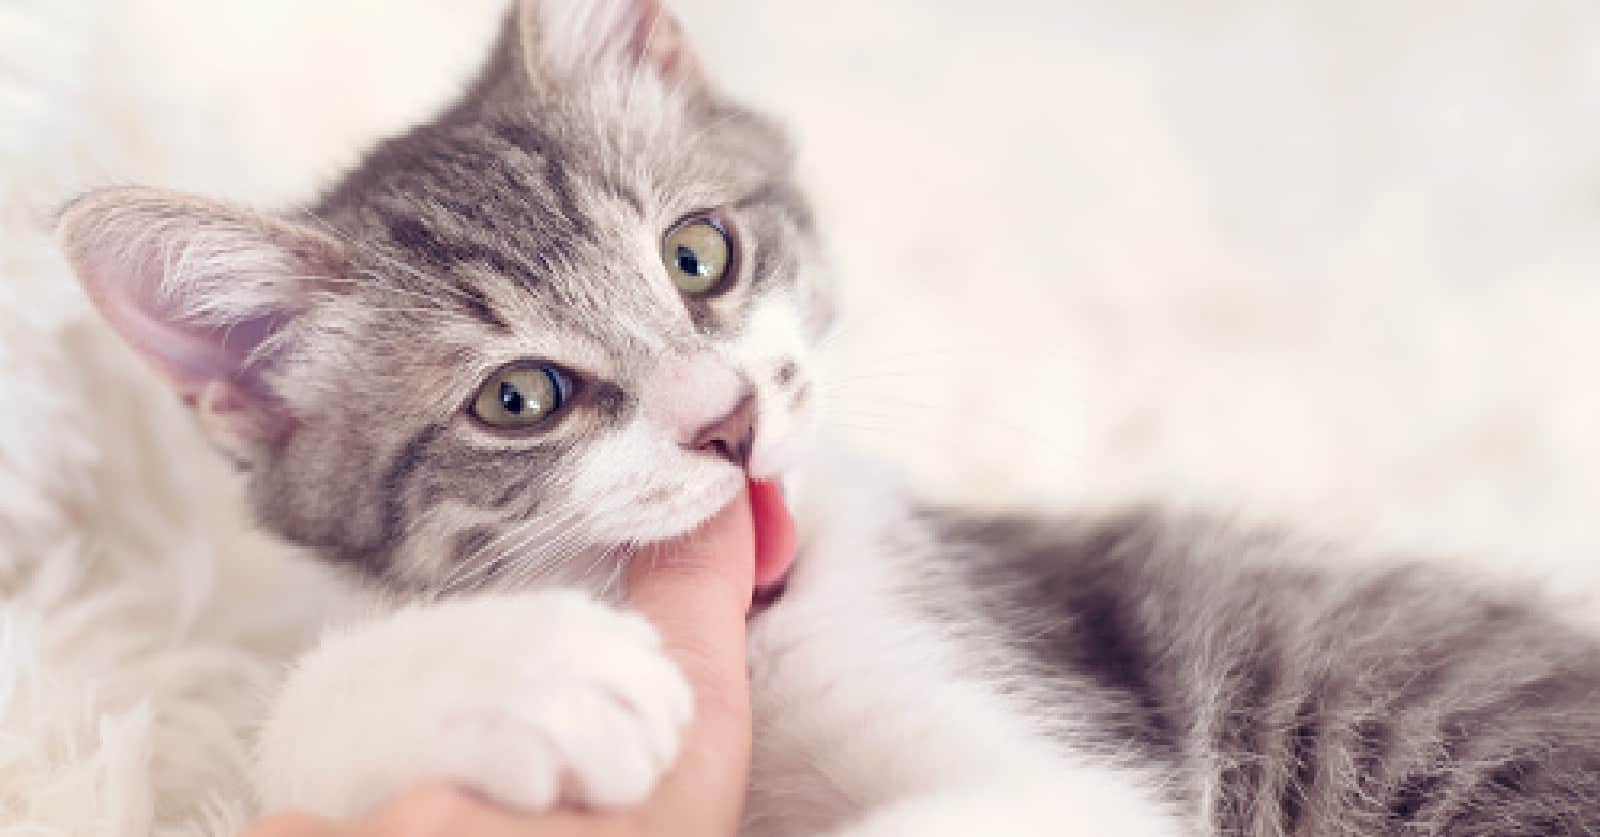 Looking for the best ways to train a kitten not to bite? We’ve got you covered! Read on for 8 simple yet proven strategies!